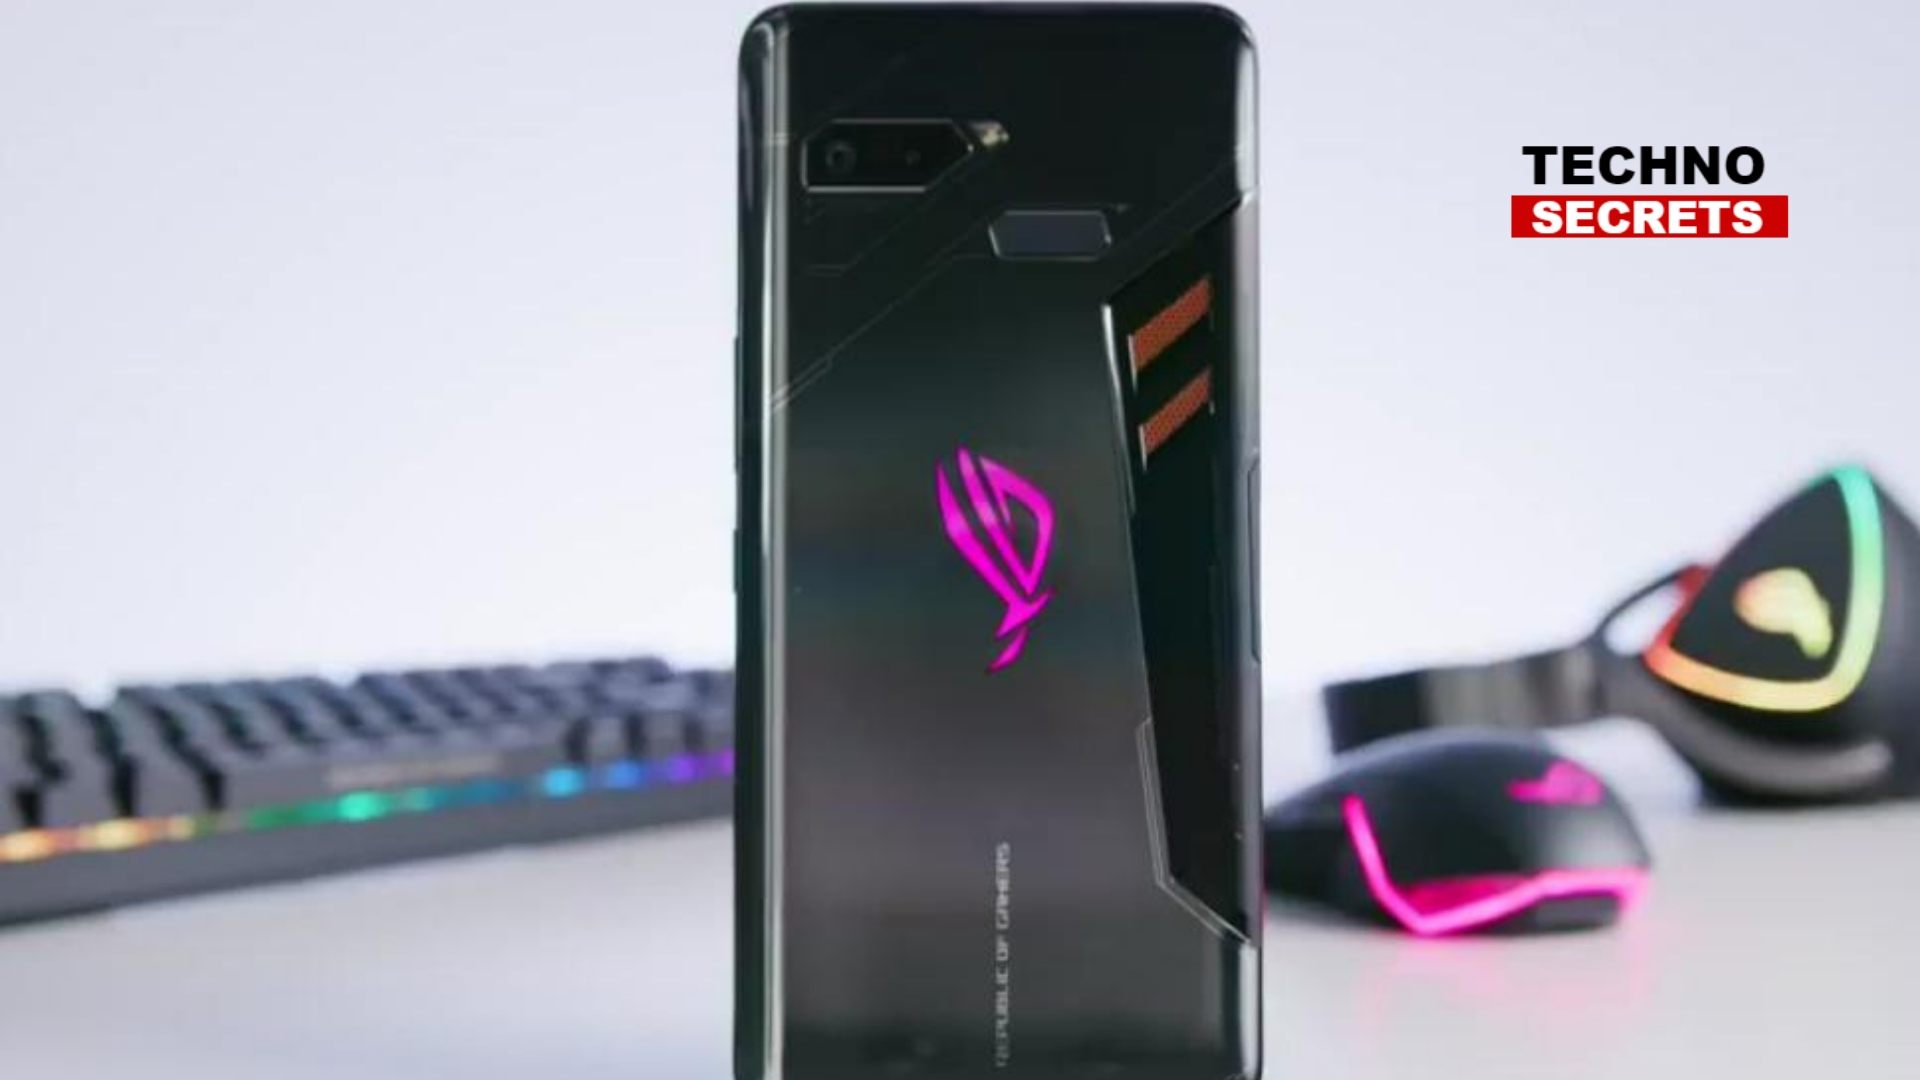 Asus ROG Gaming Smartphone To Launch In India This Month